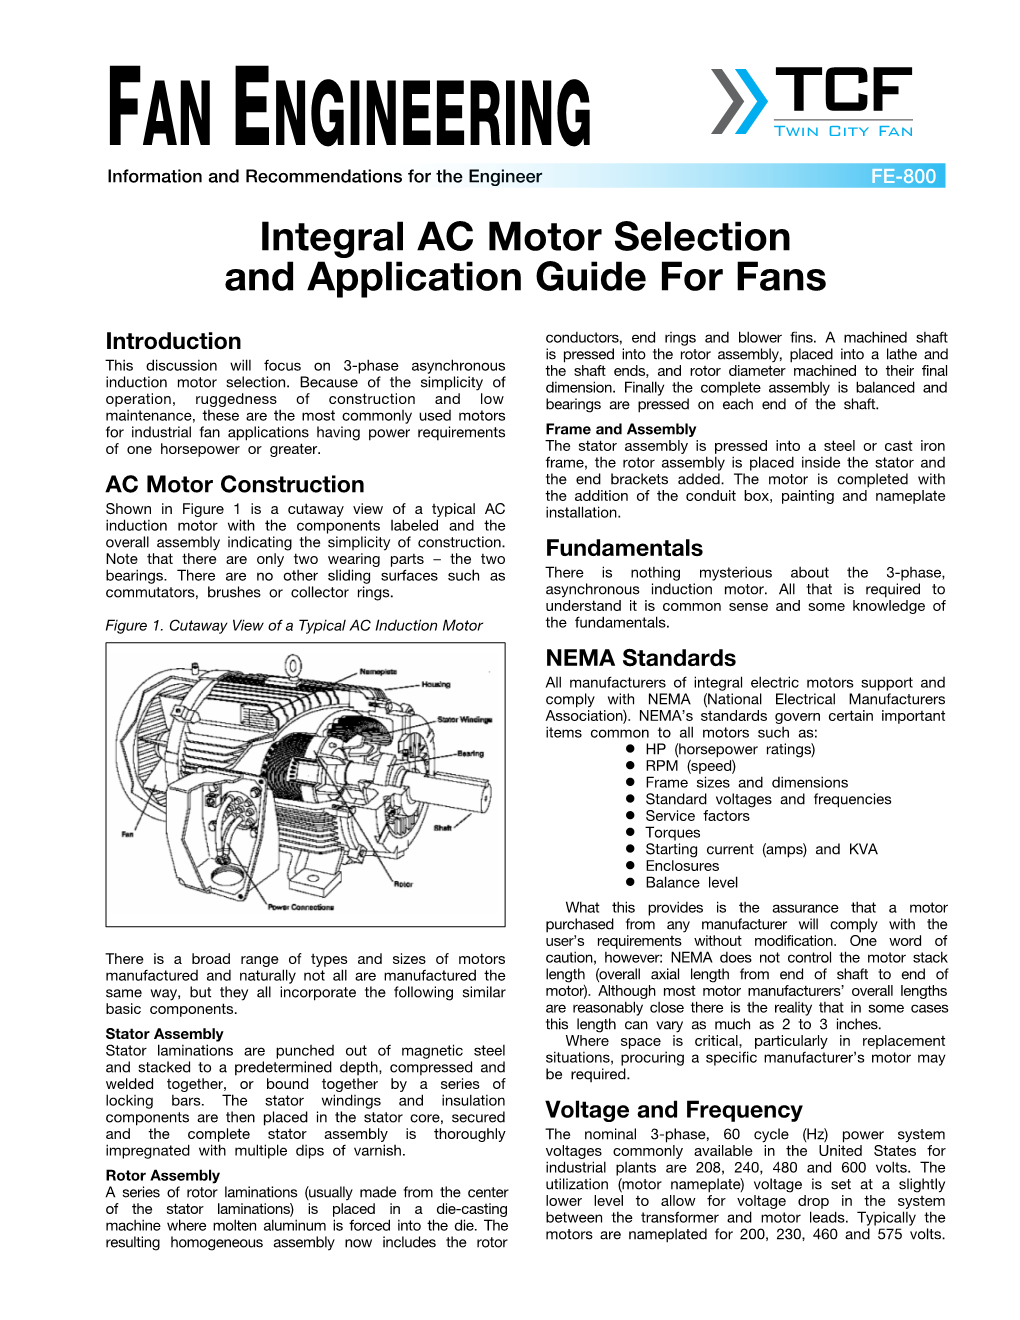 Integral AC Motor Selection and Application Guide for Fans